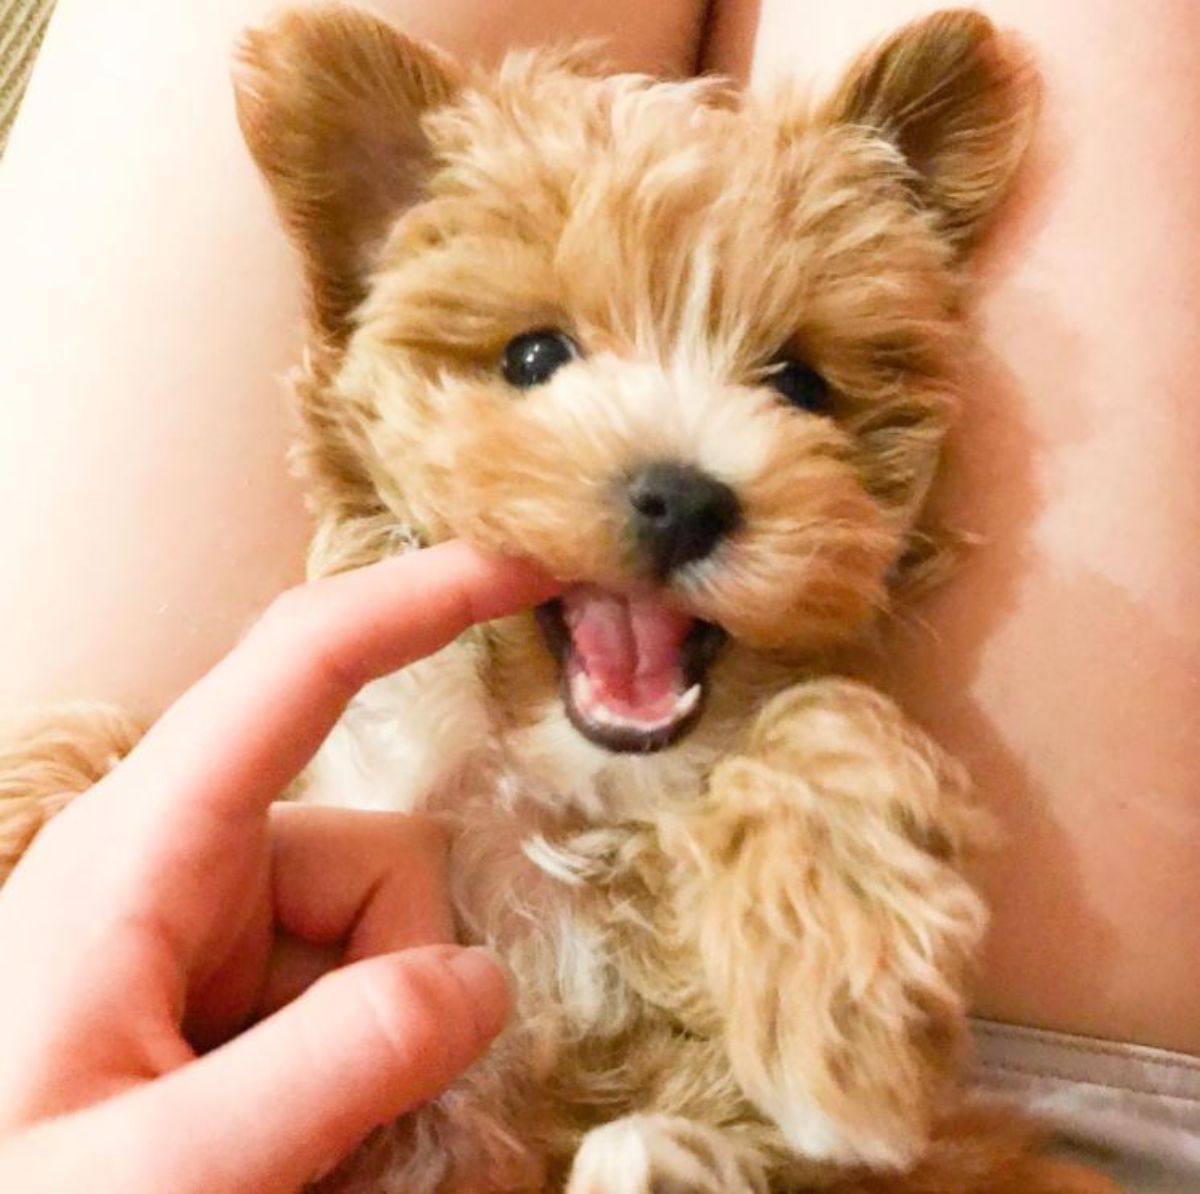 cute maltipoo biting its owners hand while lying on her lap